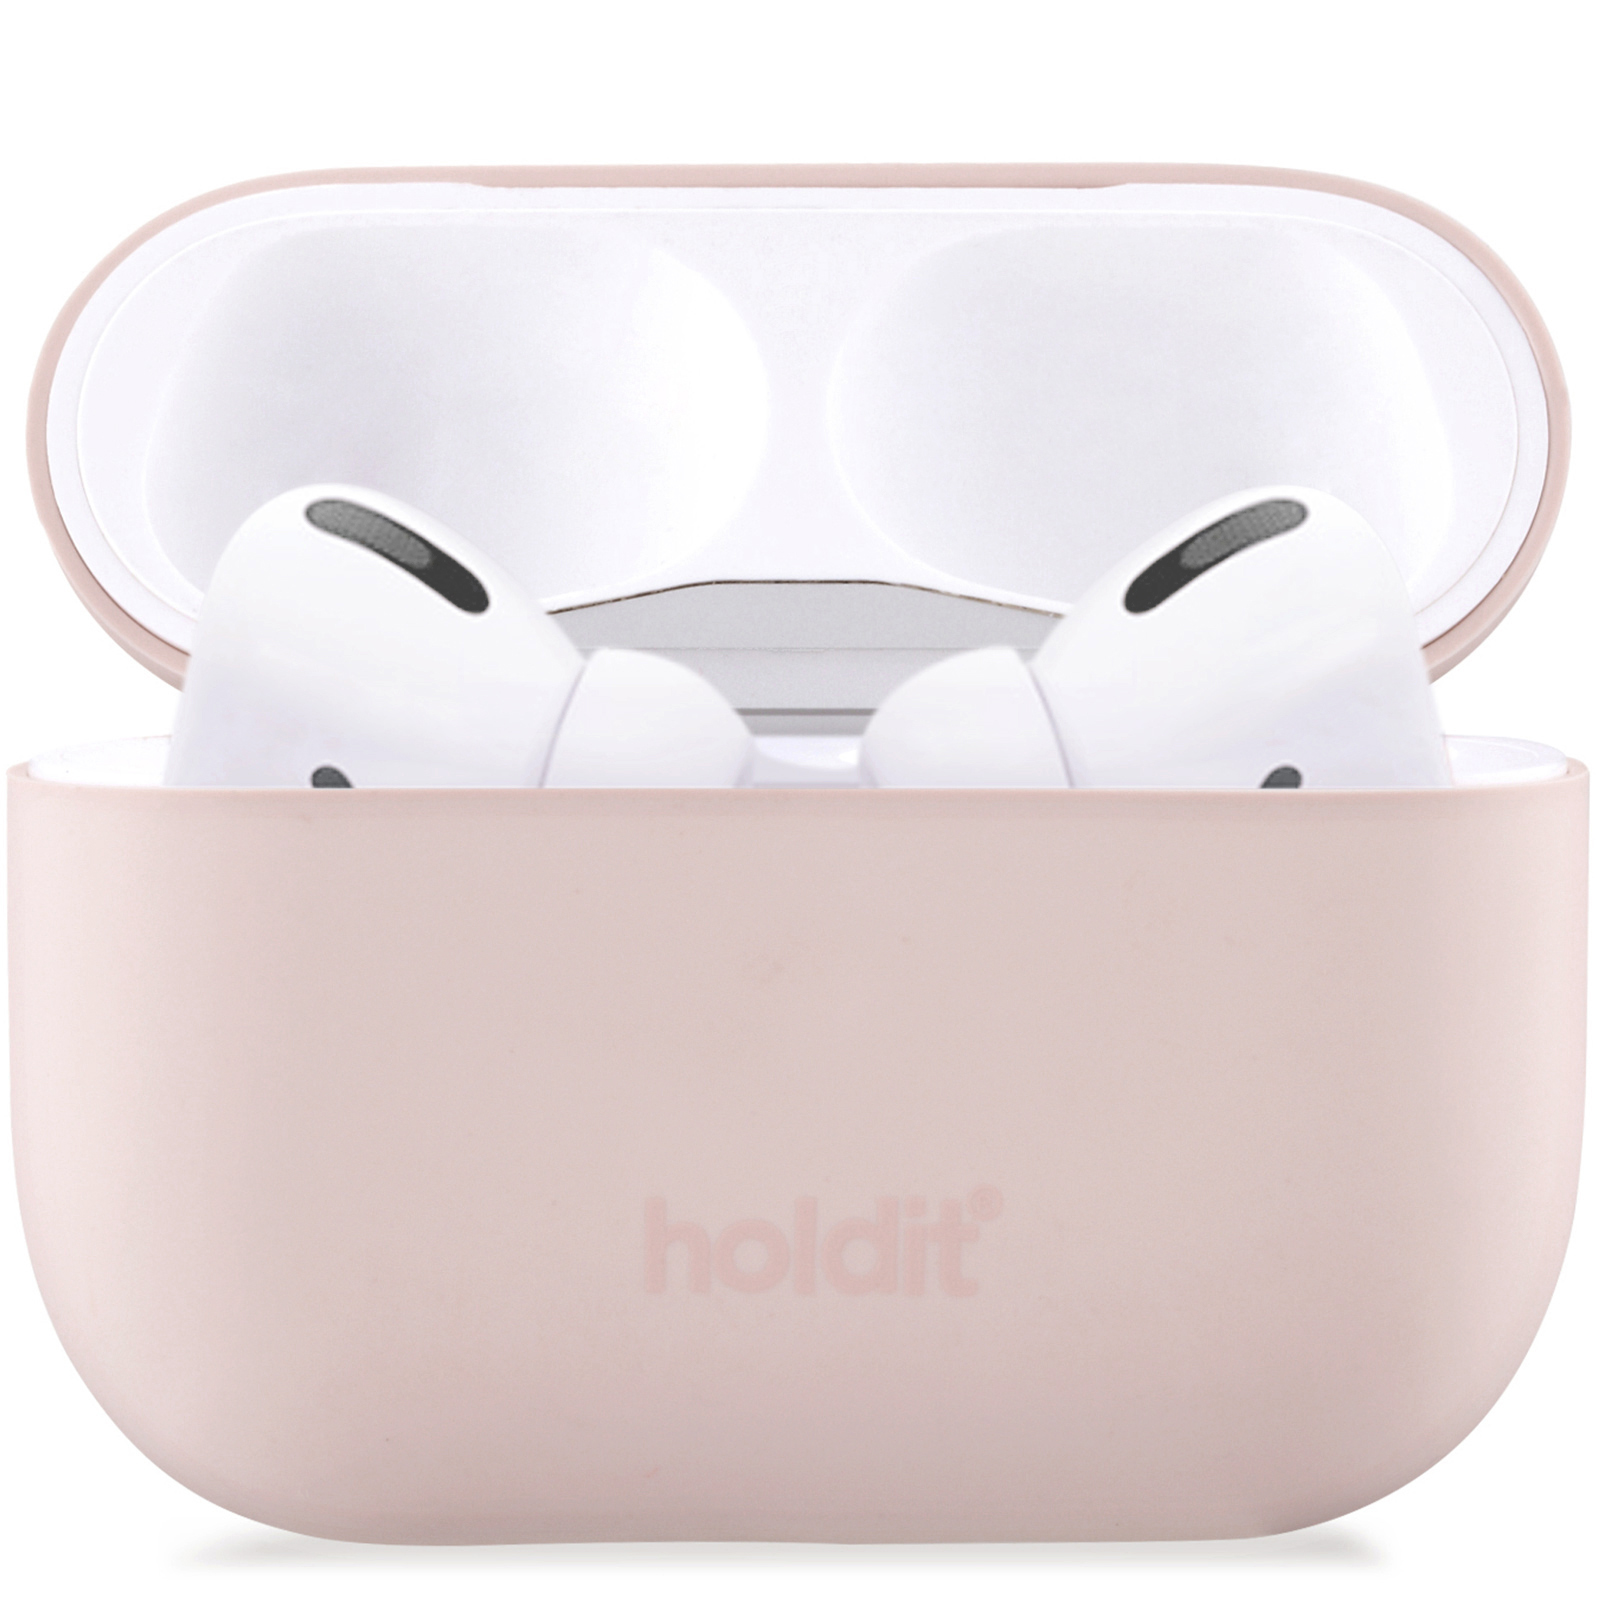 Airpods Pro, case silicone, blush pink